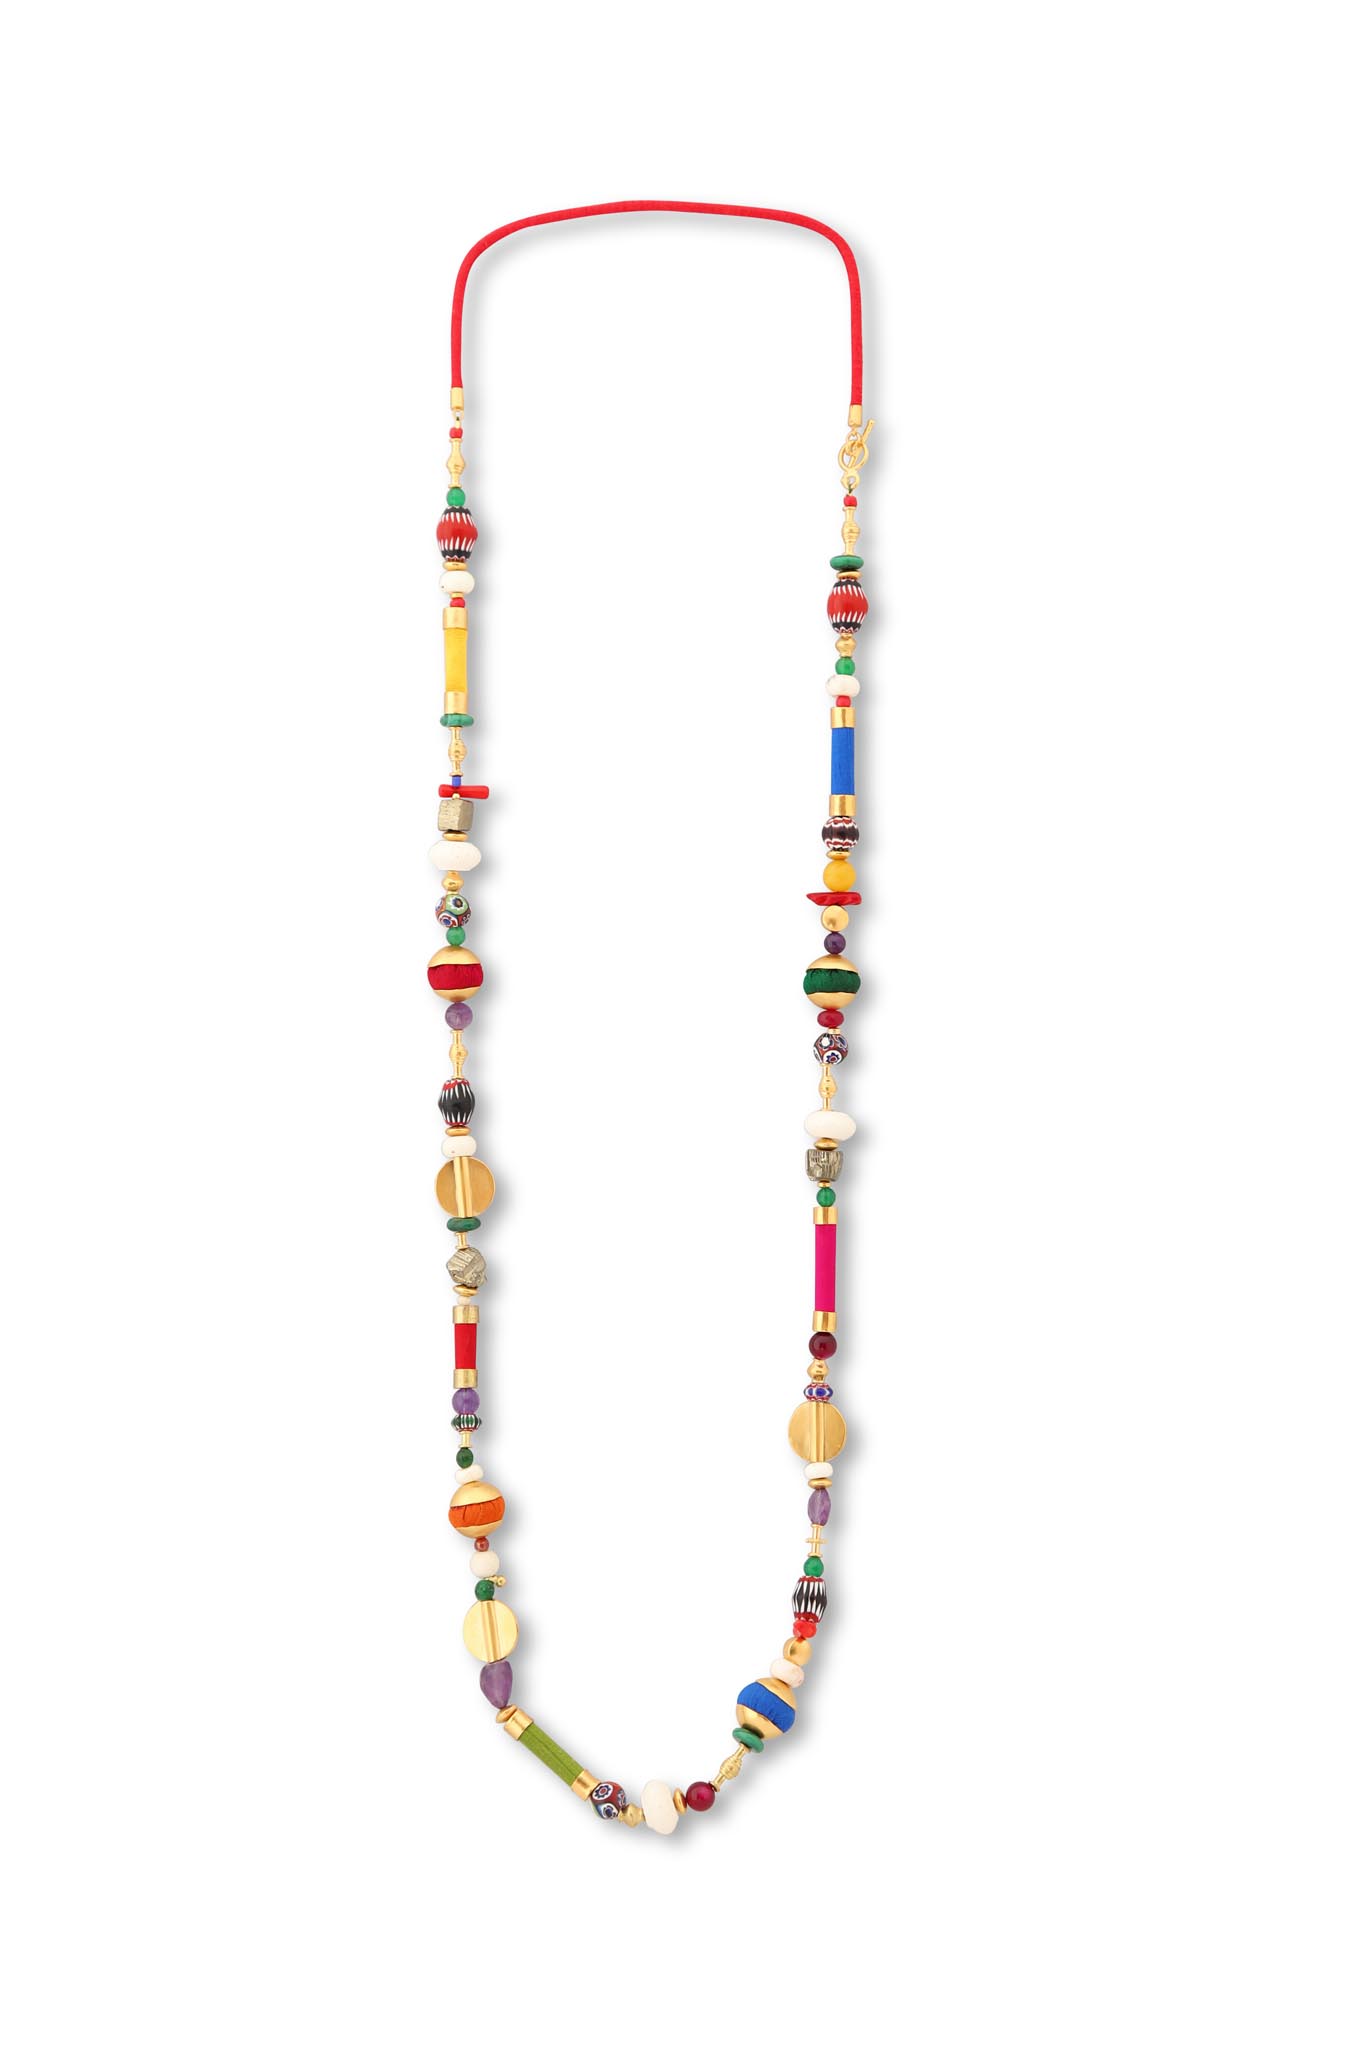 A Thousand and One Beads Necklace